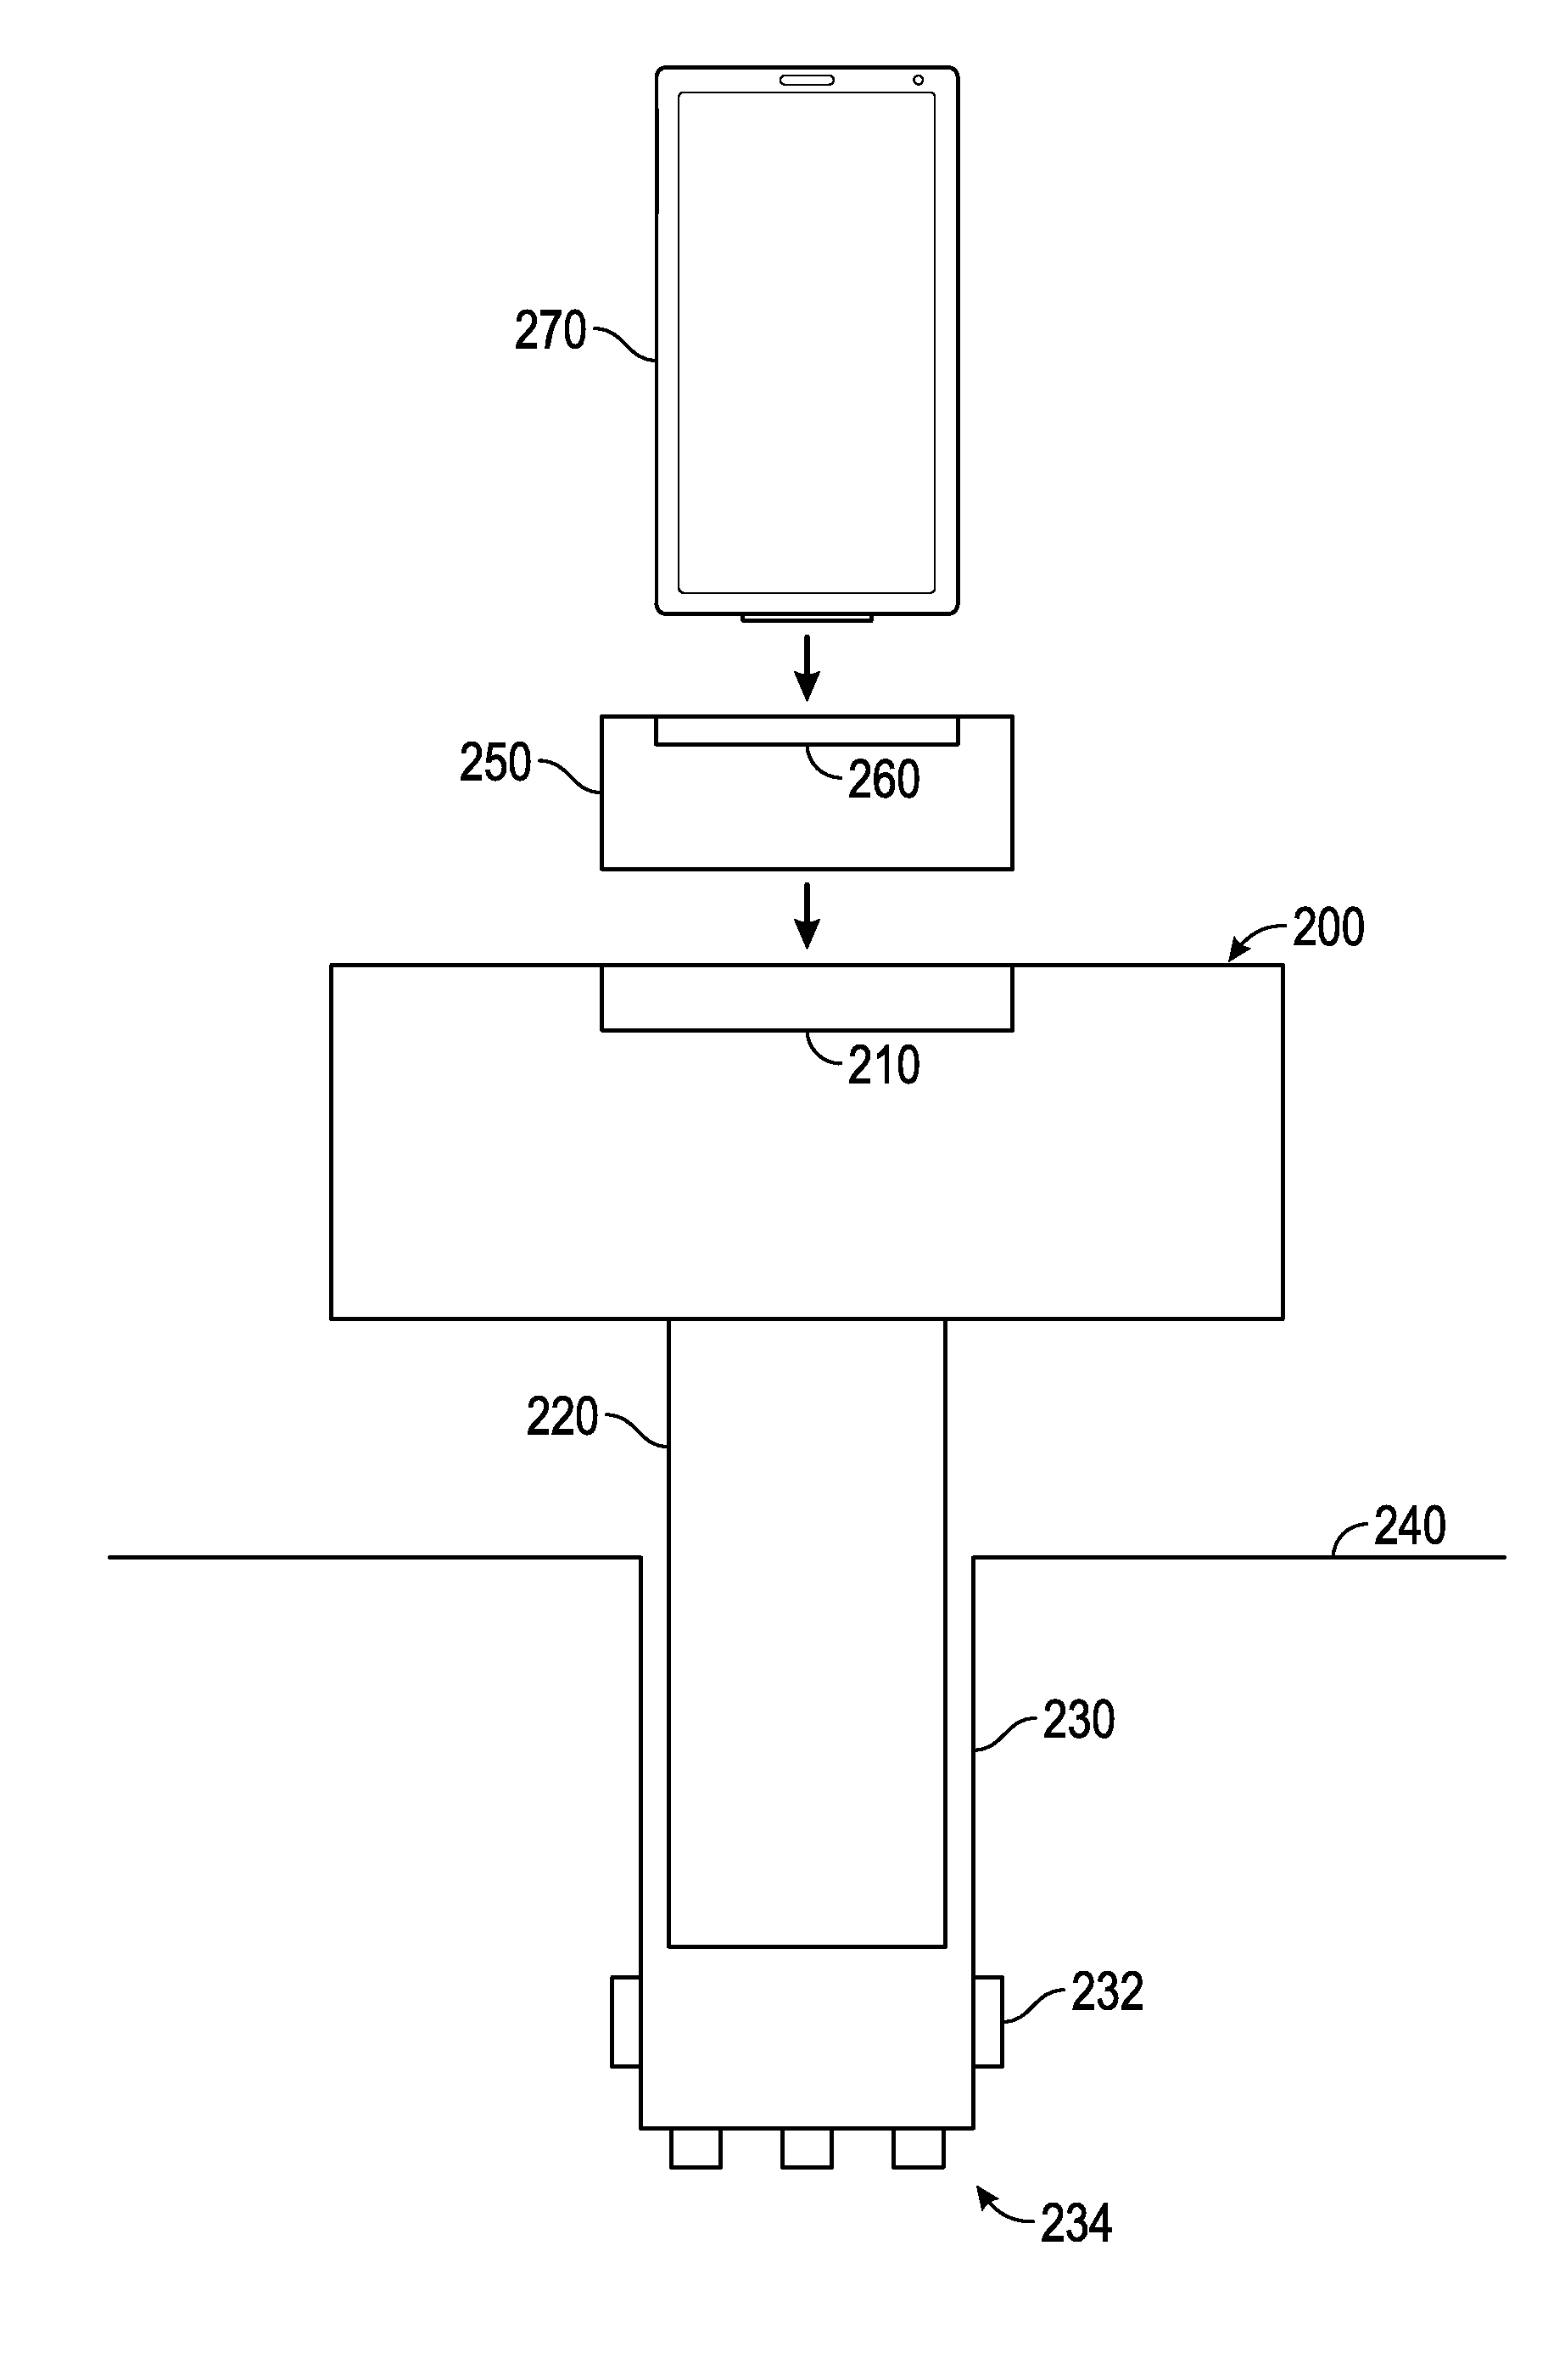 Automobile adaptor system, apparatus and methodology